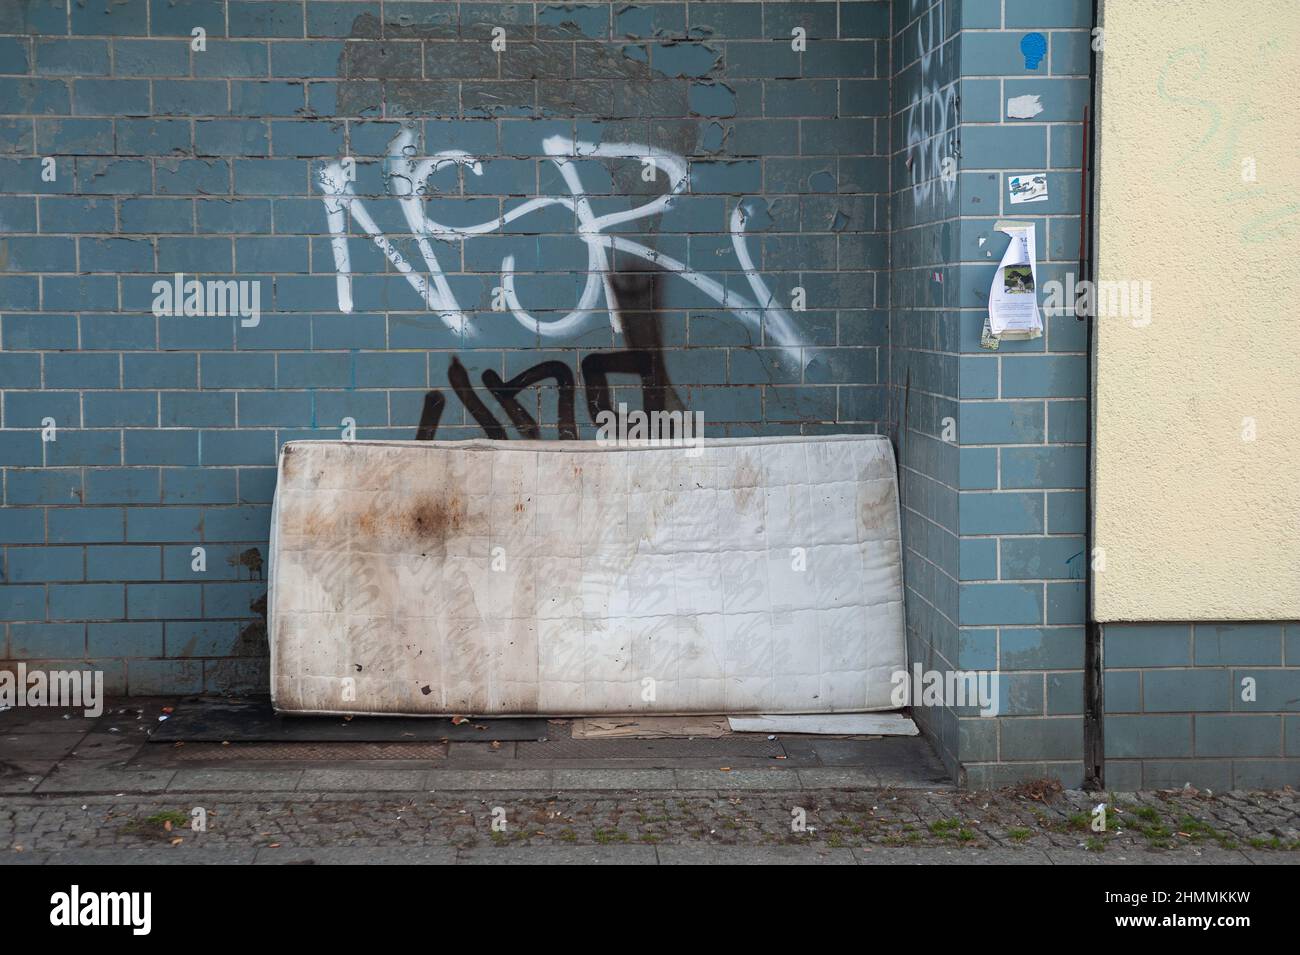 16.12.2021, Berlin, Germany, Europe - Old, filthy and illegally discarded mattress leans against a building wall smeared with graffiti at a roadside. Stock Photo